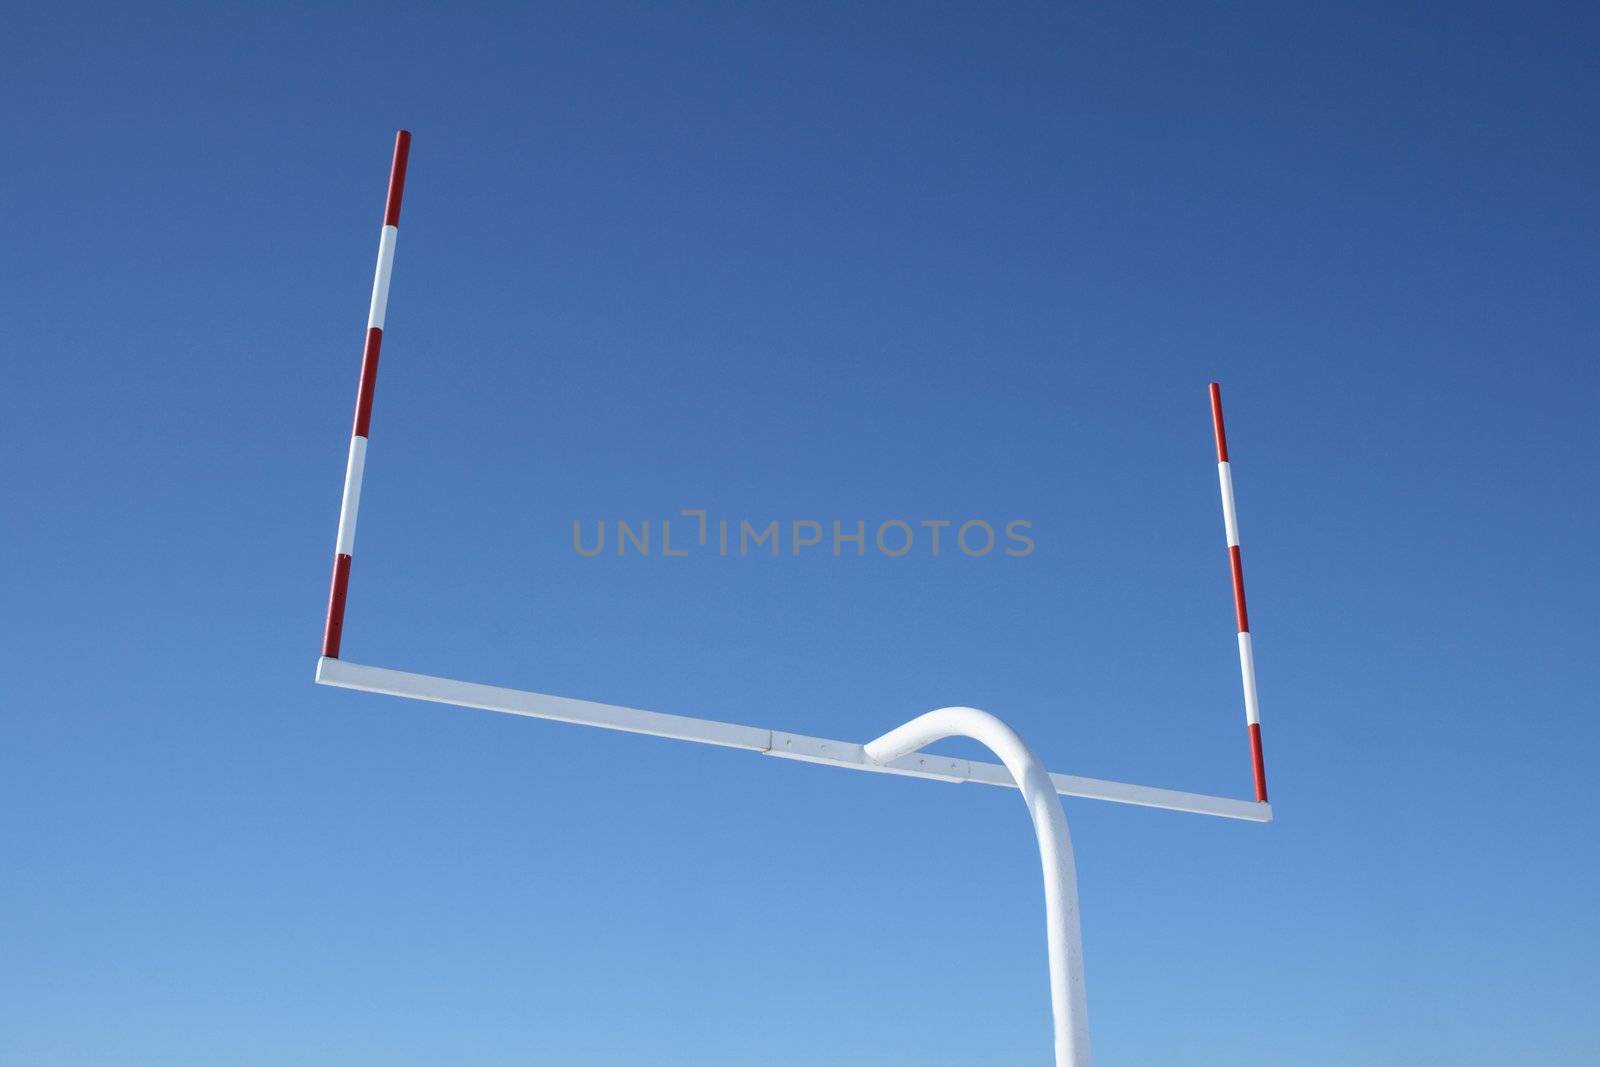 Uprights of football goal posts by anikasalsera